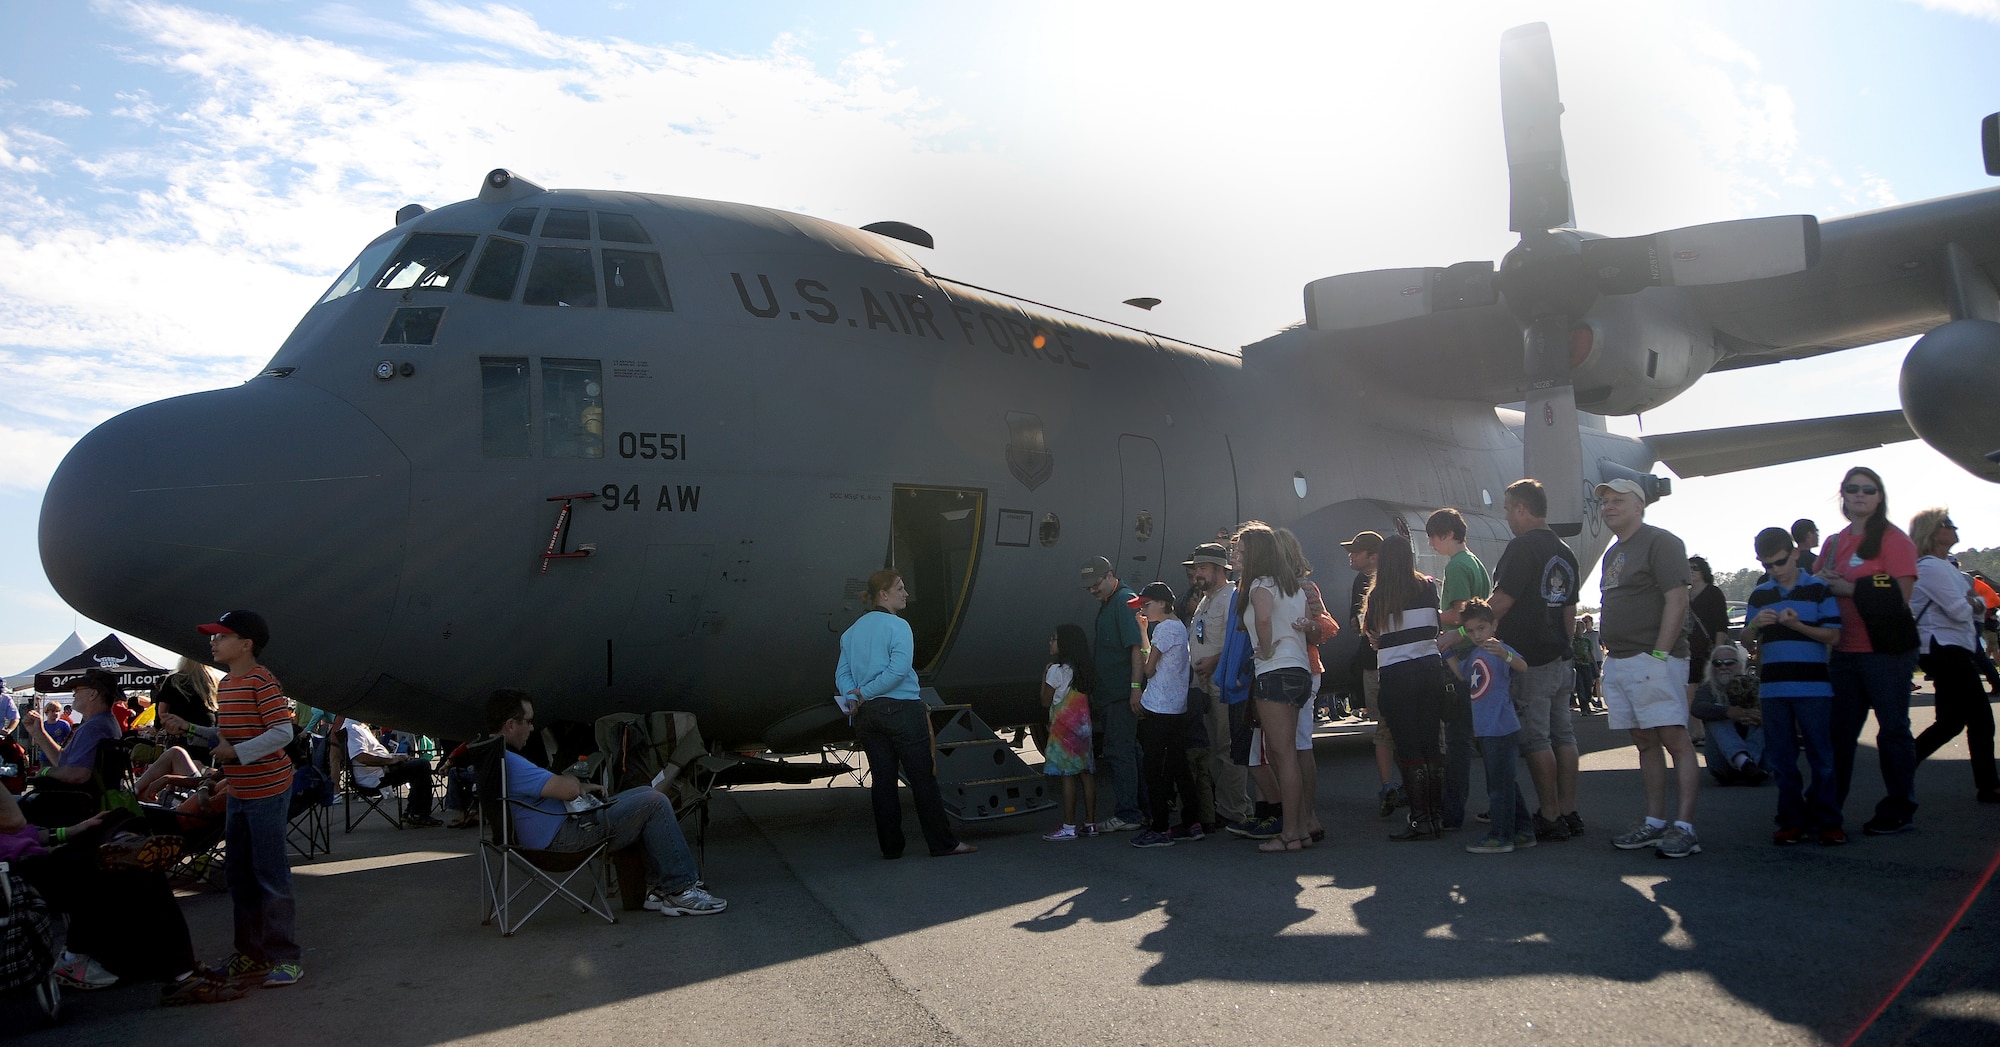 Visitors to the Wings over North Georgia air show line up to tour the cockpit of a U.S. Air Force C-130 Hercules from Dobbins Air Reserve Base, Ga. Oct. 18, 2014, at Rome, Ga. The static display was brought to WONG to help visitors better understand the capabilities of the 94th Airlift Wing. (U.S. Air Force photo by Senior Airman Daniel Phelps/Released)